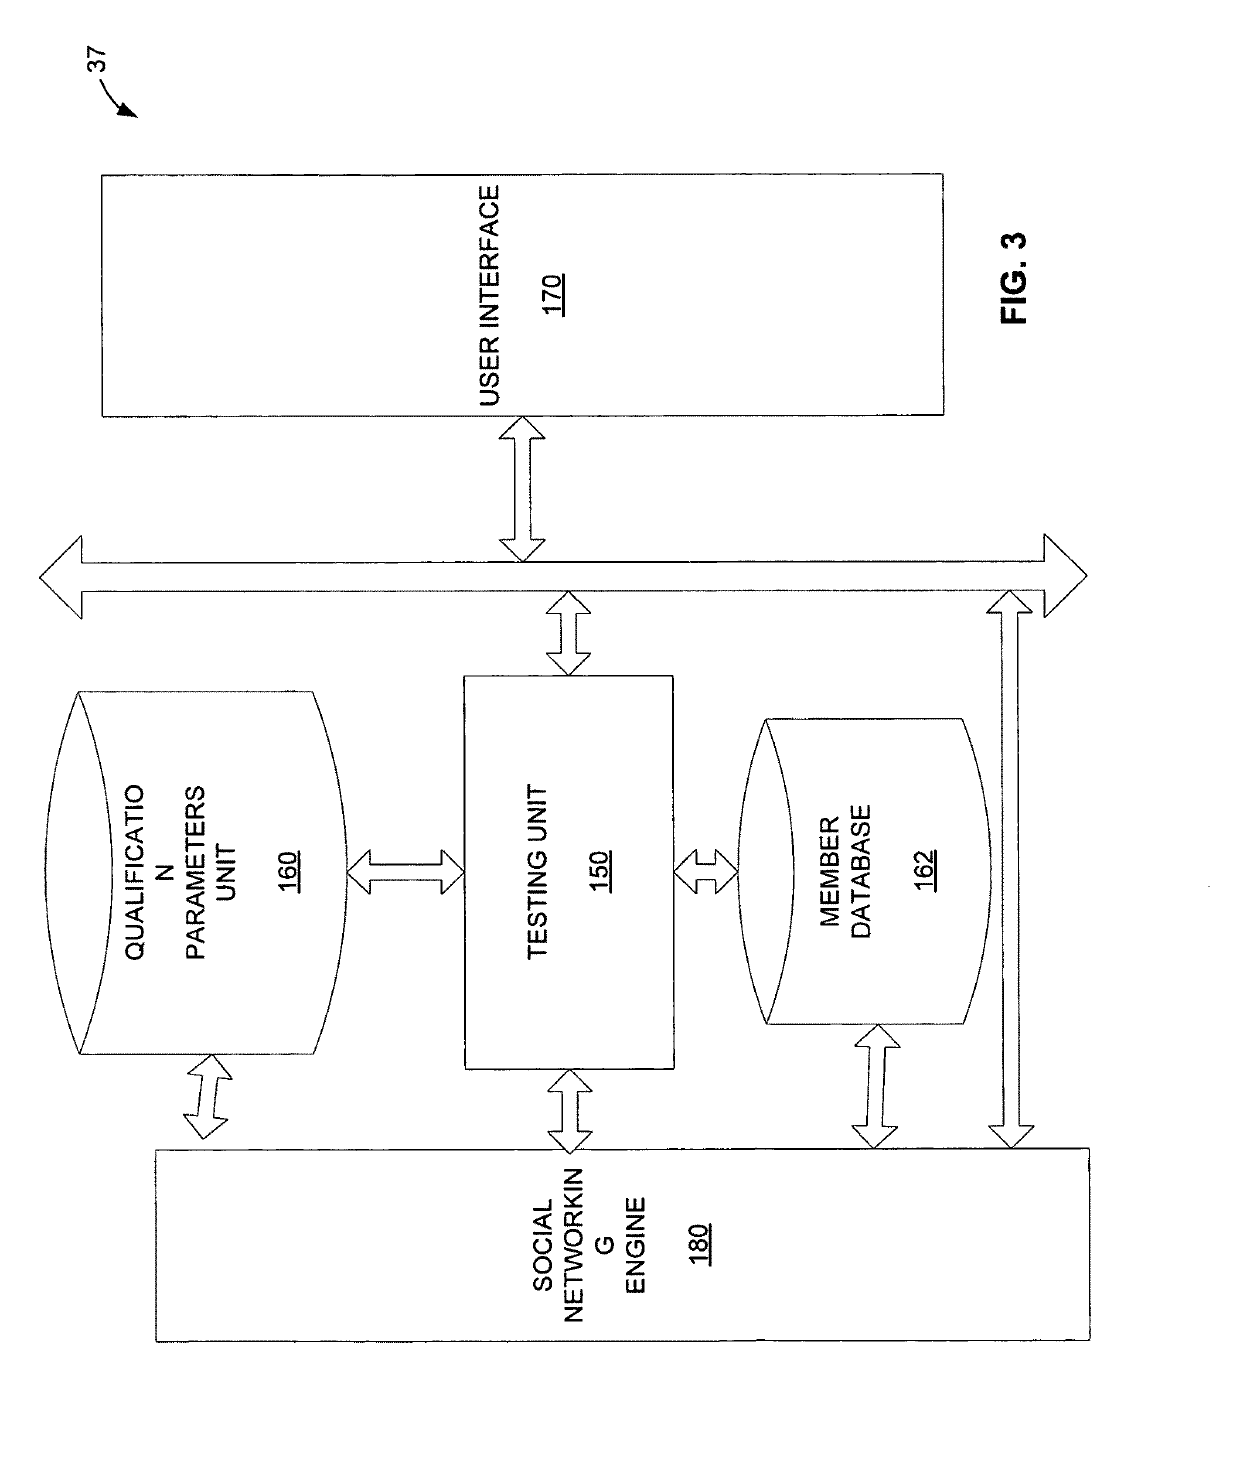 Method and apparatus for social network qualification systems